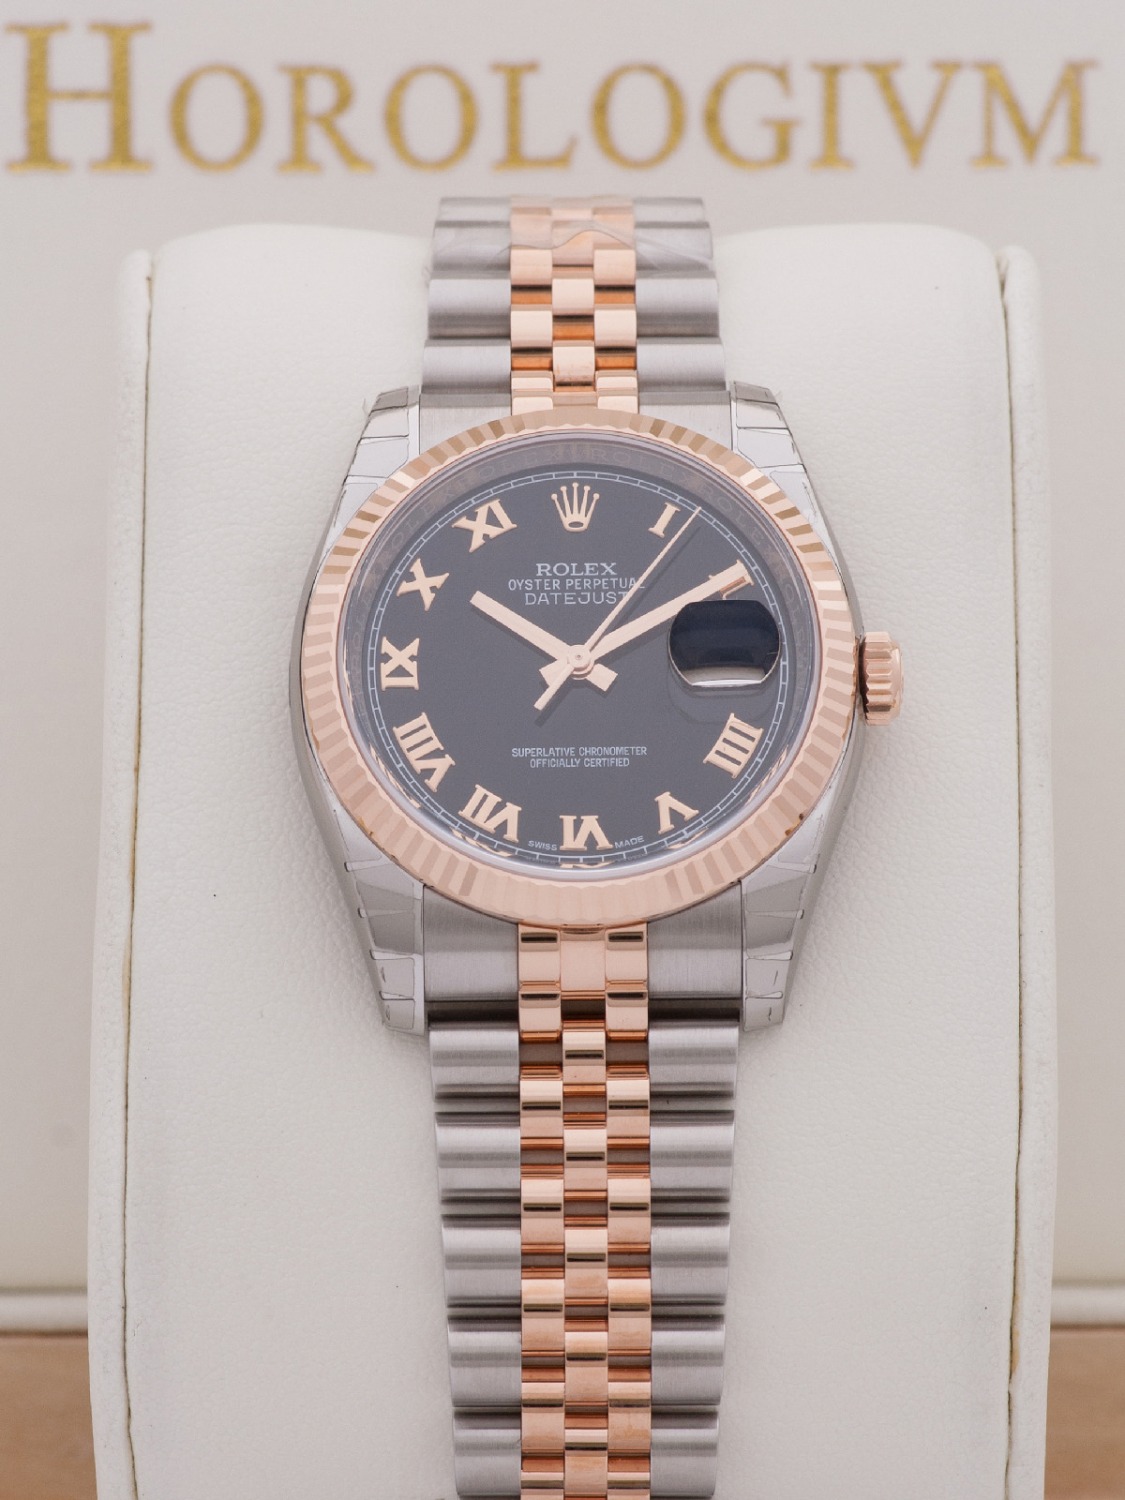 Rolex Datejust Two Tone 36MM Black Dial watch, two - tone (bi - colored) silver and rose gold